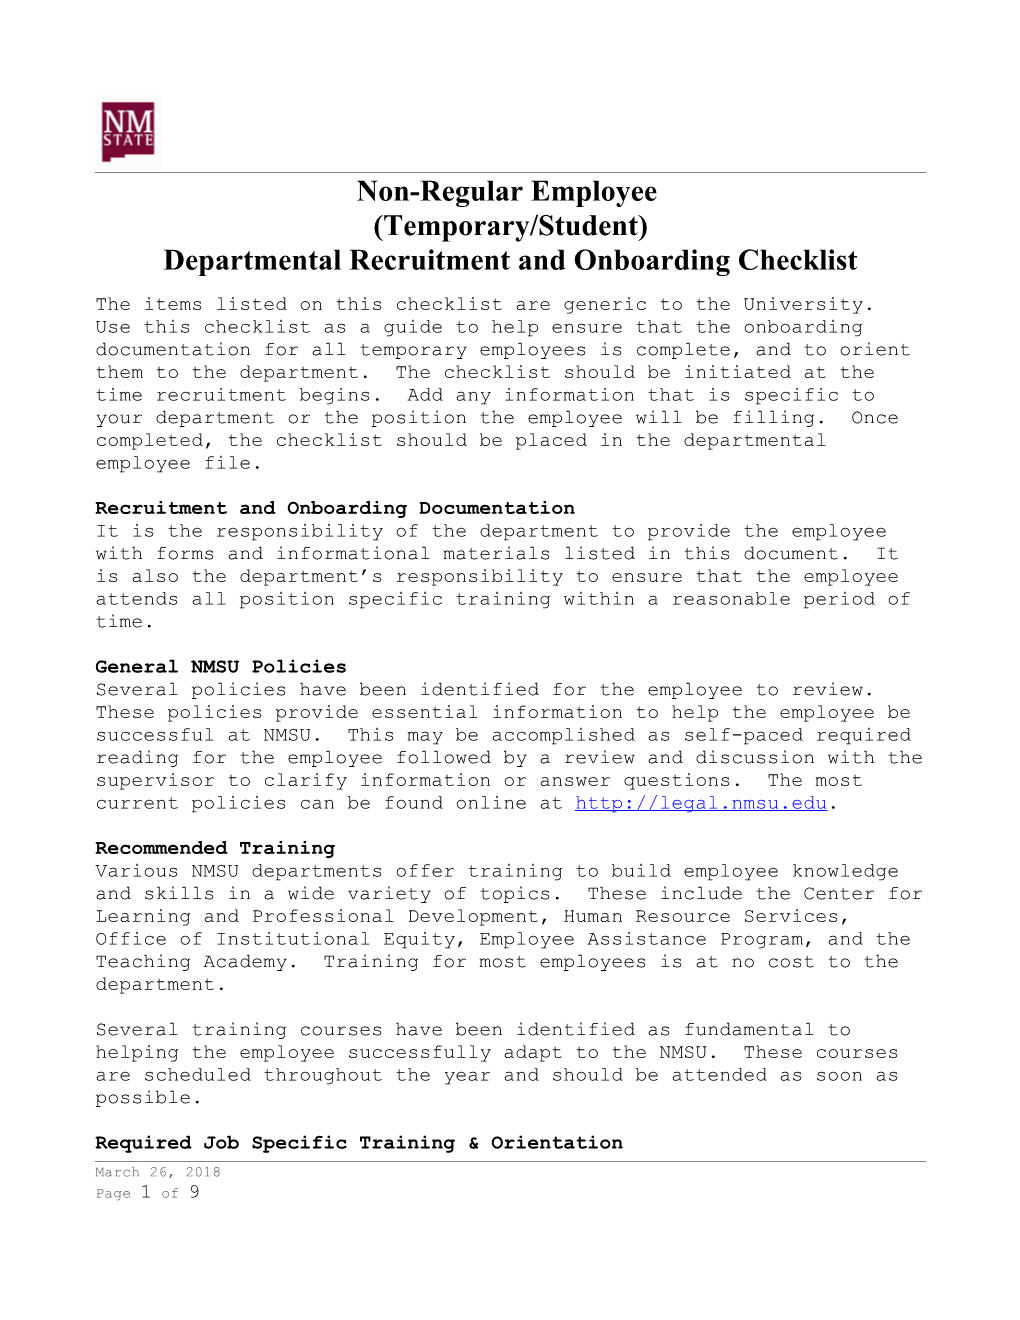 Departmental Recruitment and Onboarding Checklist